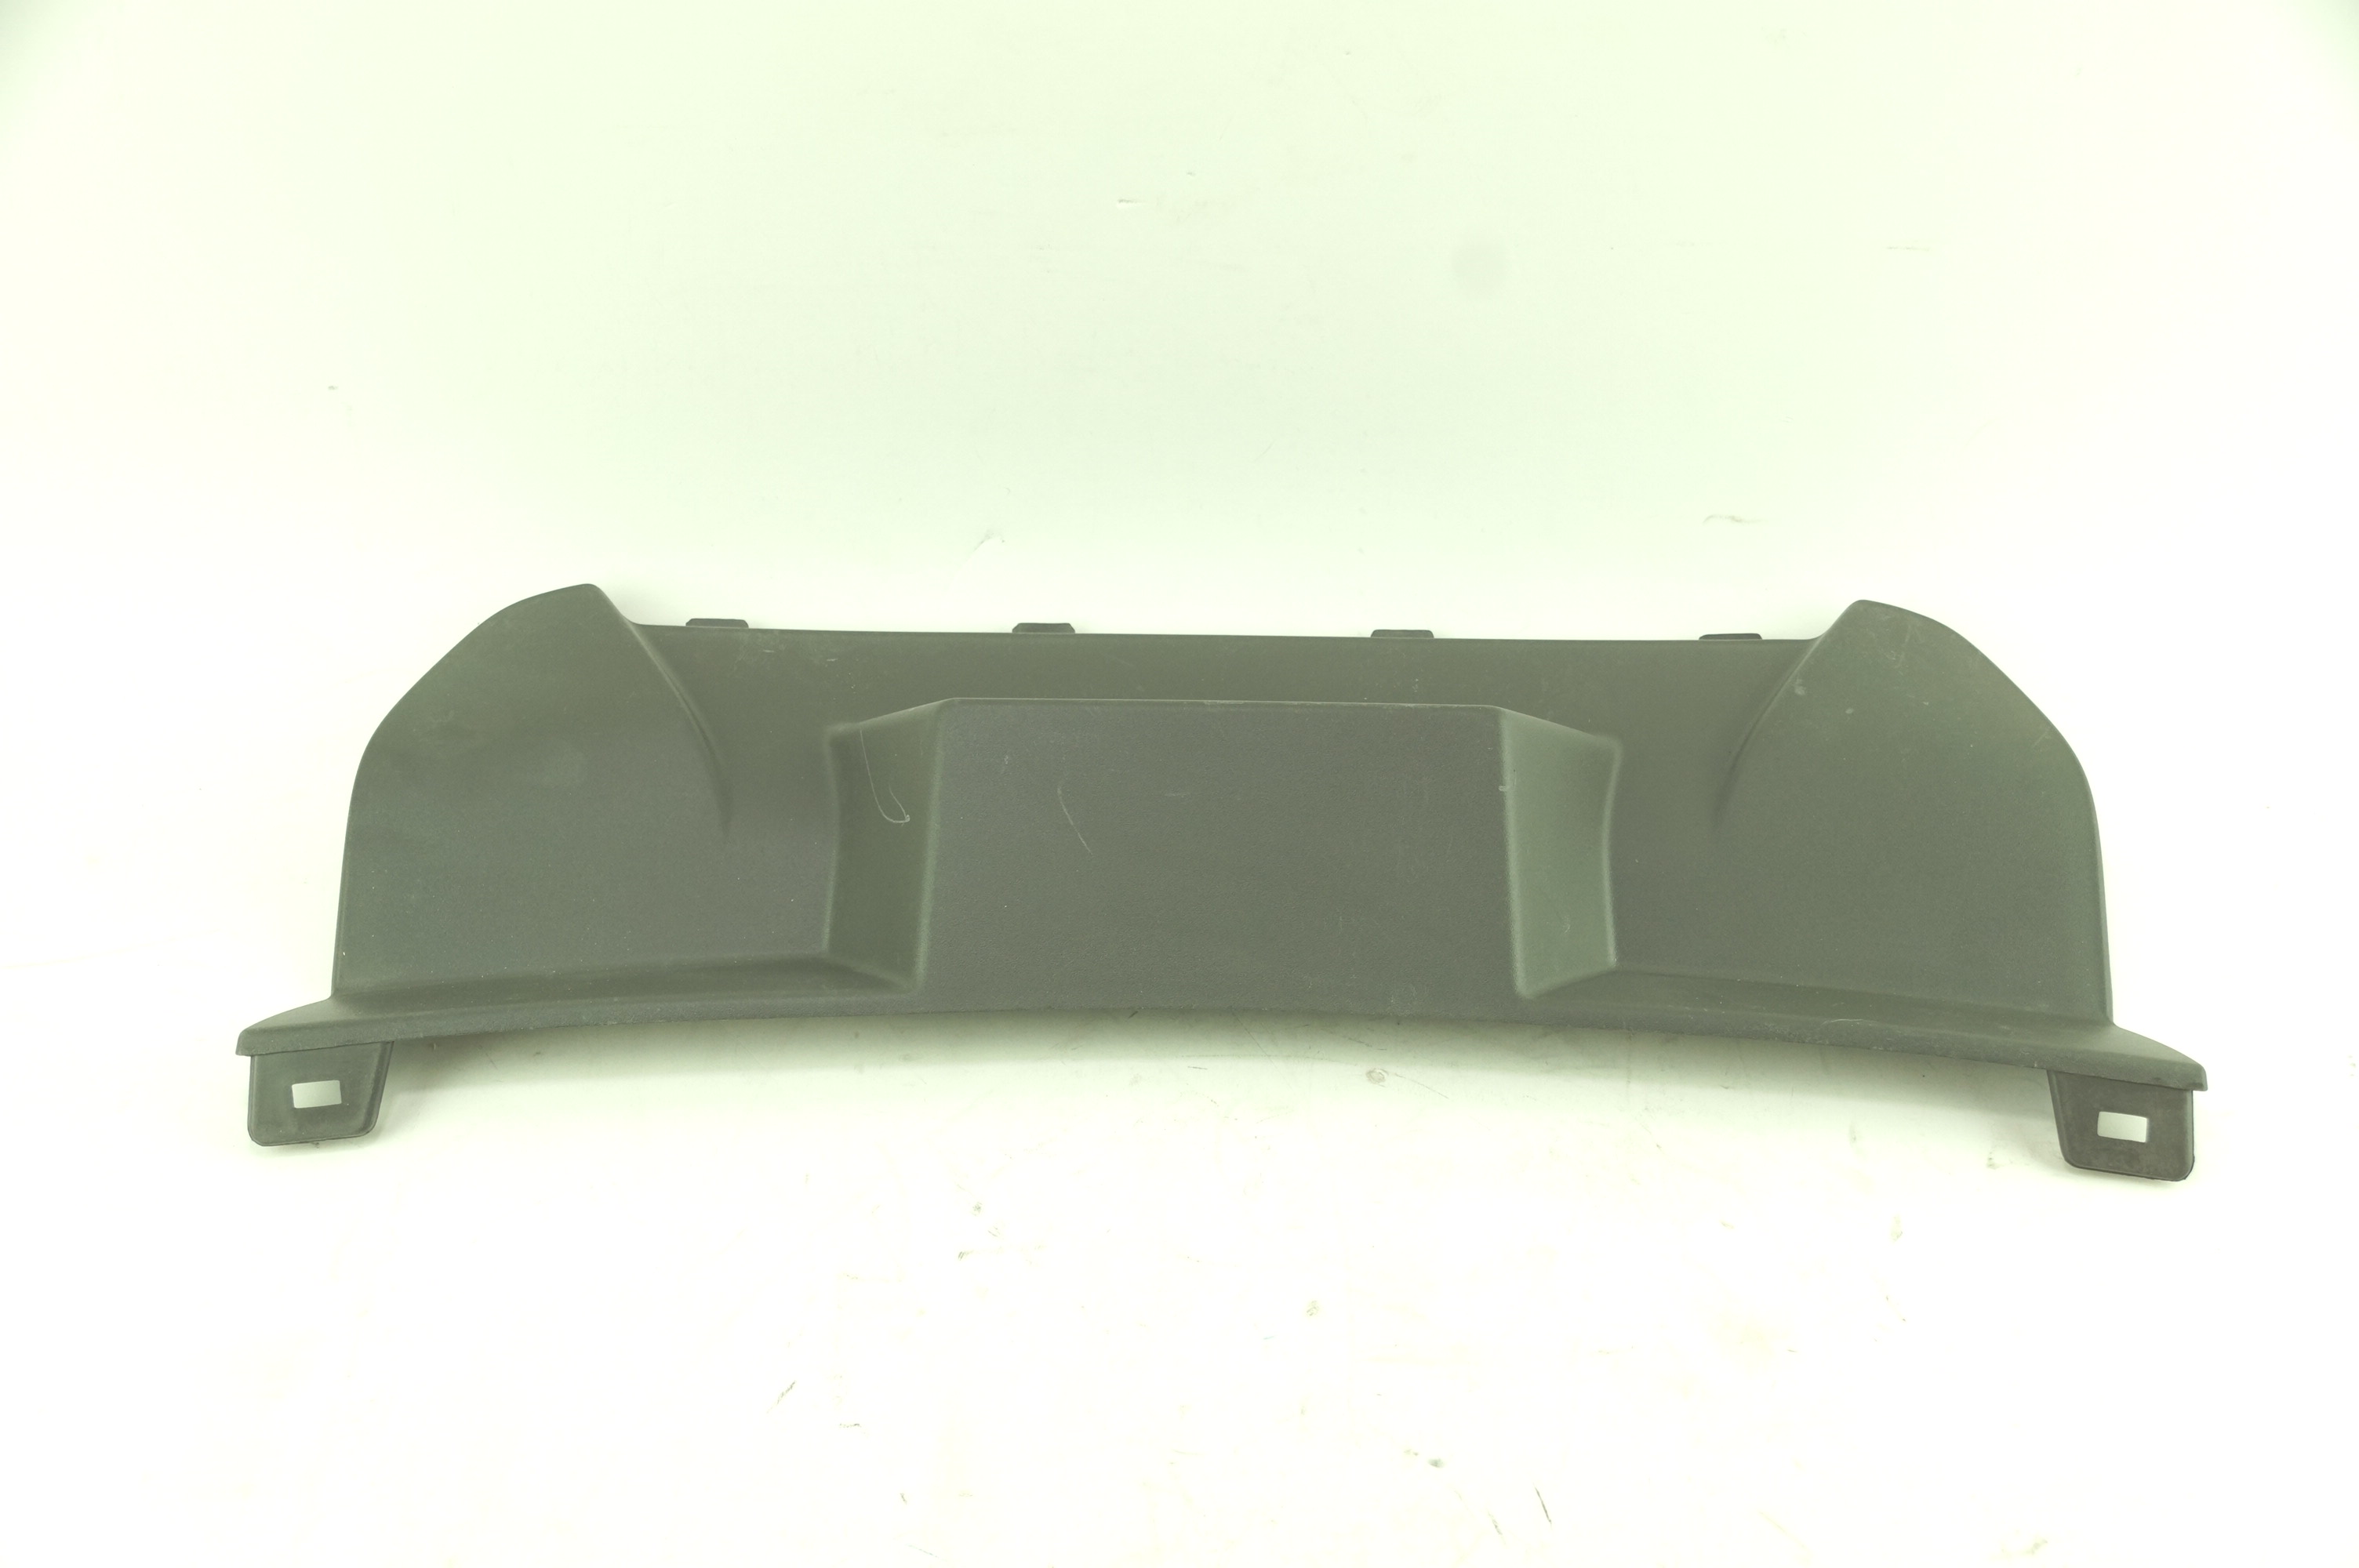 New Genuine OEM 15930191 GM Chevy Traverse Rear Bumper Hitch Cover 09-12 - image 1